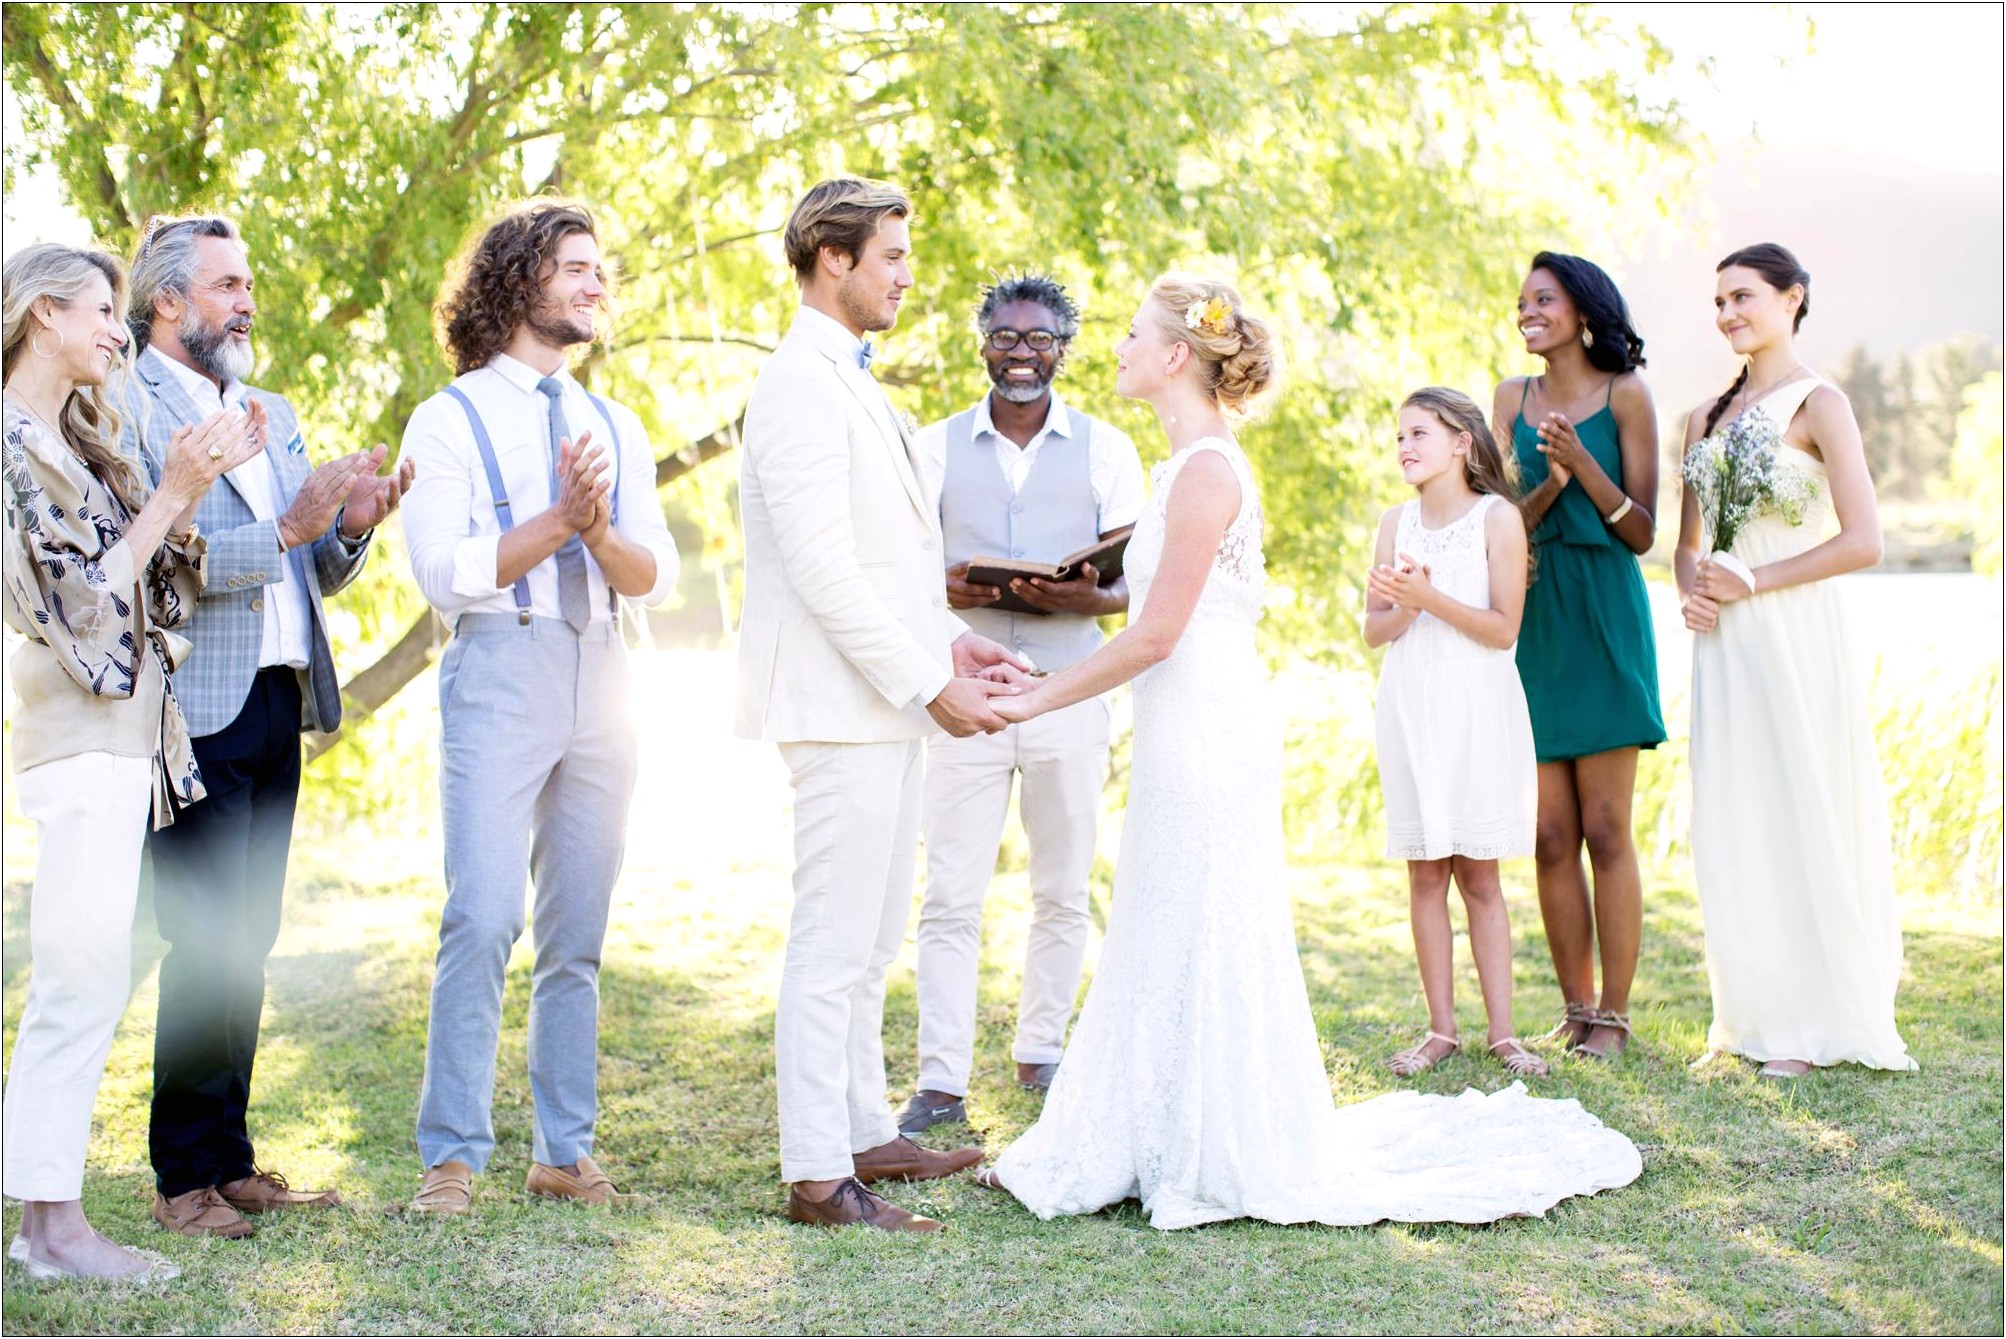 Inviting Wedding Guests To Ceremony Only